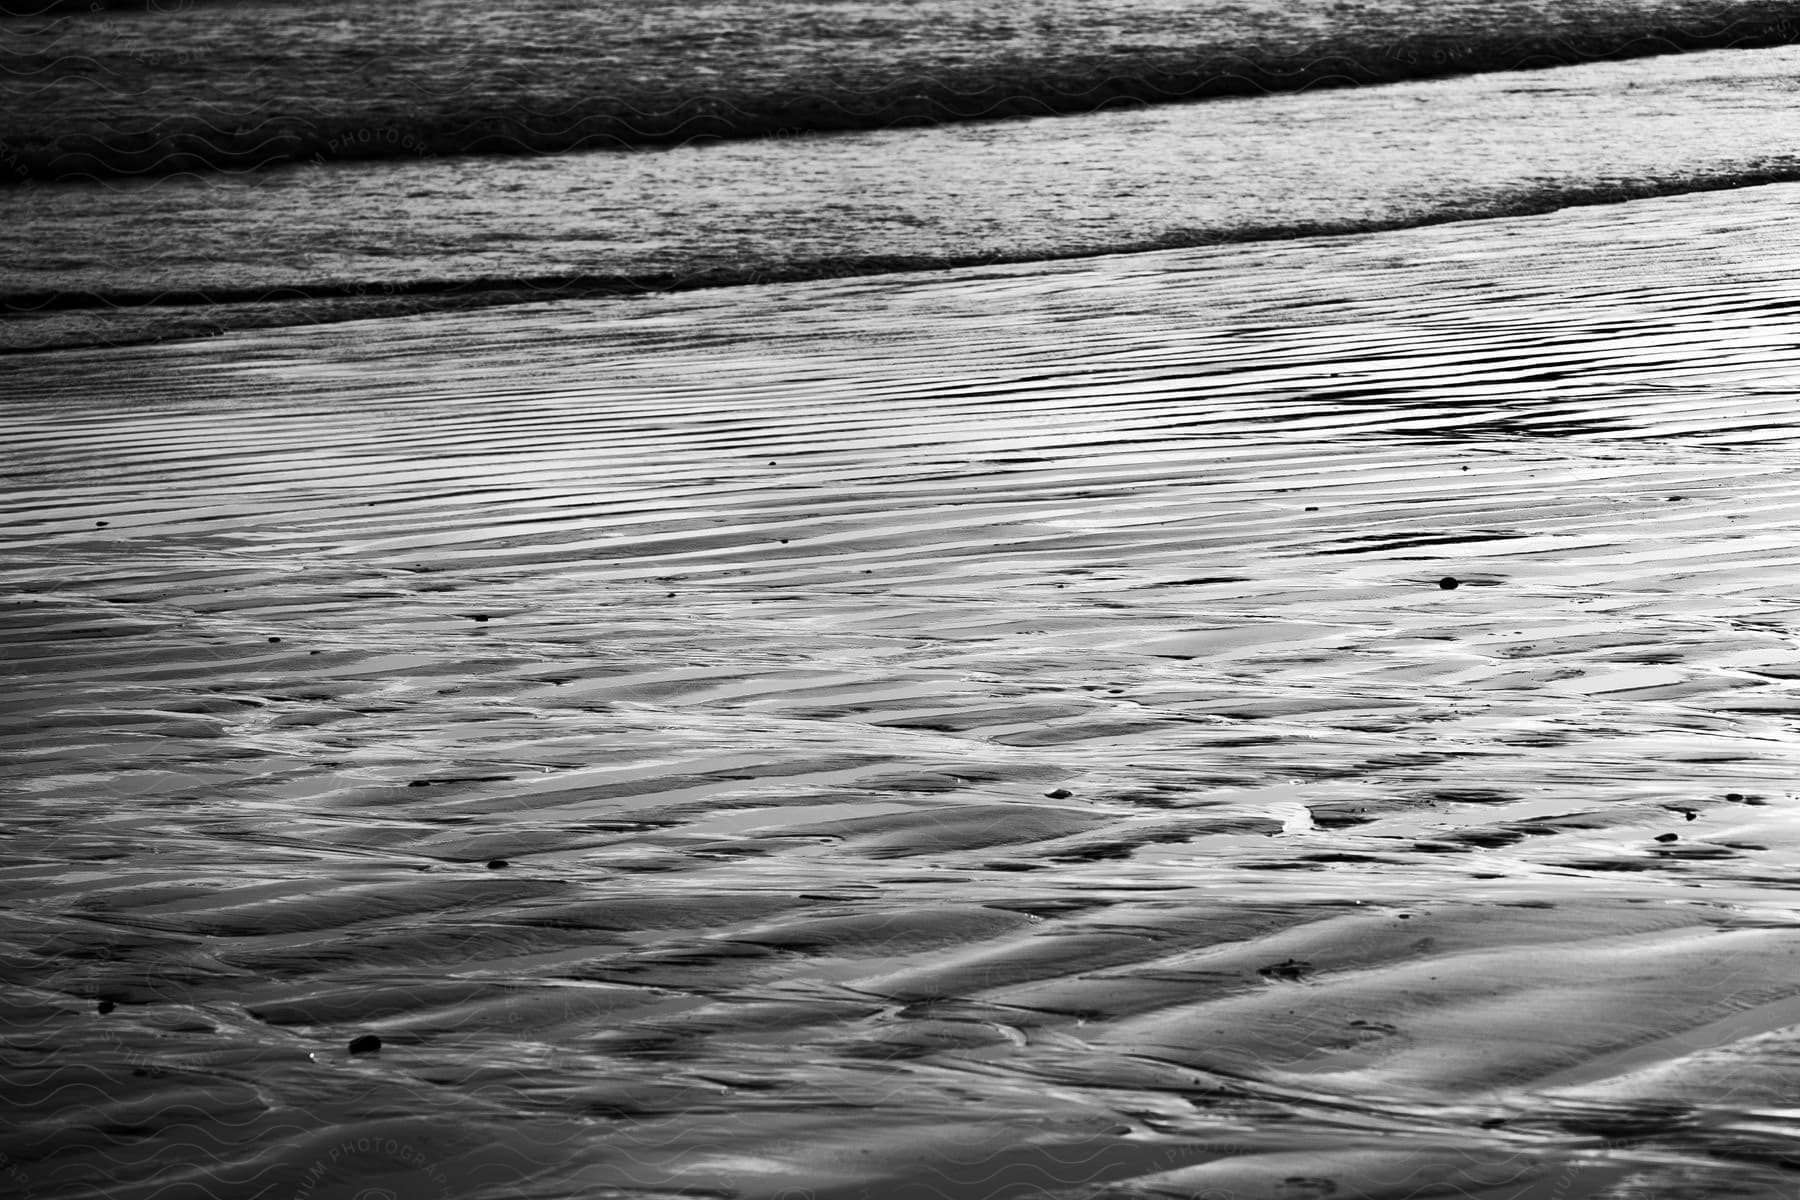 View of the beach sand wet with the sea, featuring calm waves in a black and white photograph.